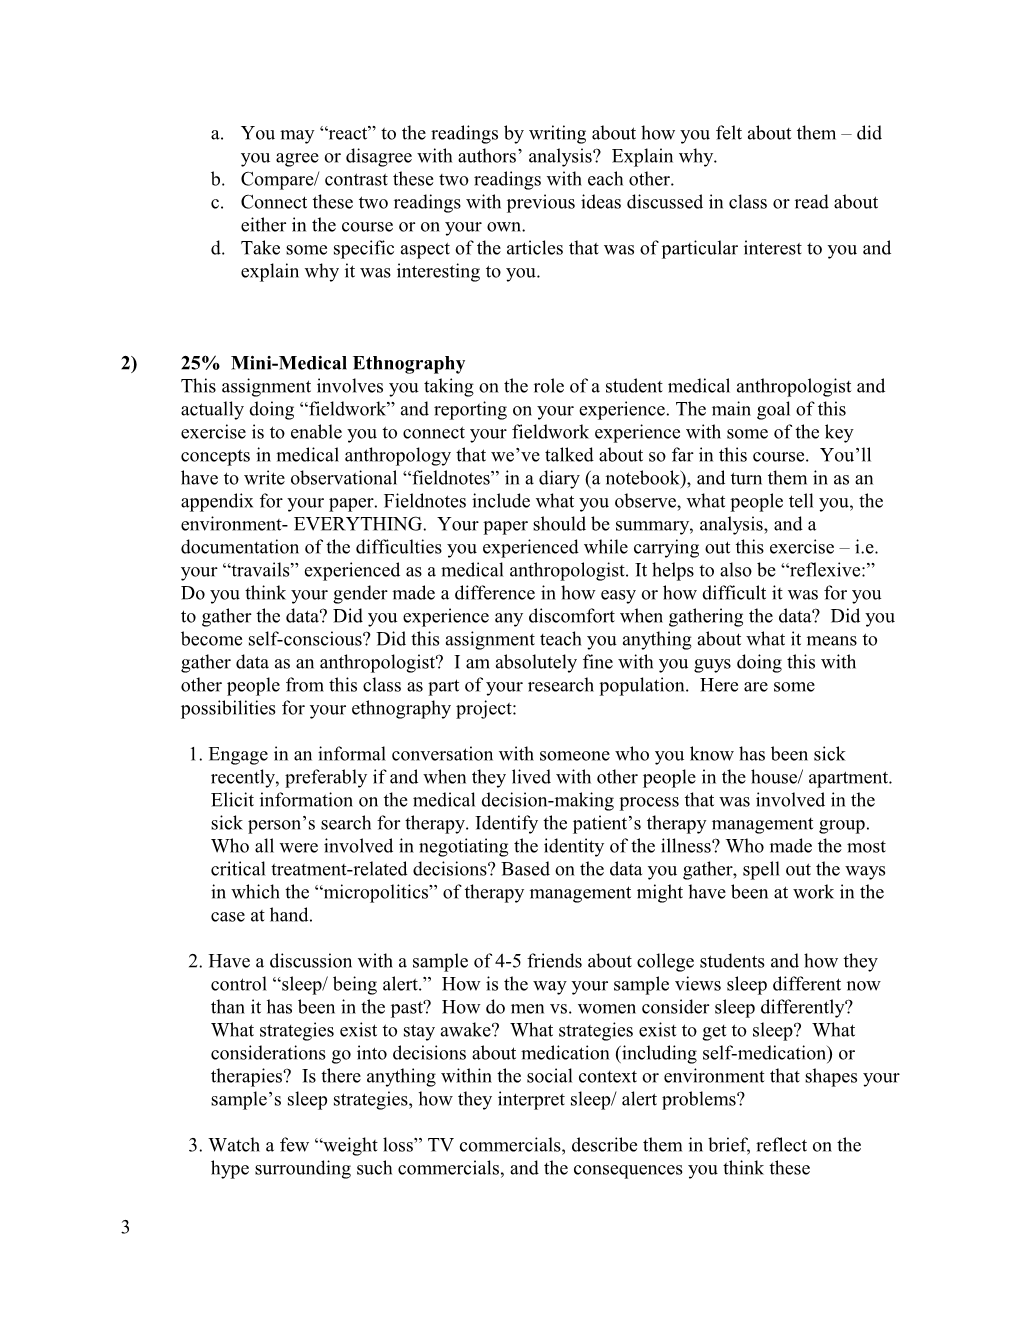 Med Anth Potential Readings for Class Spring 2005, Unt s1